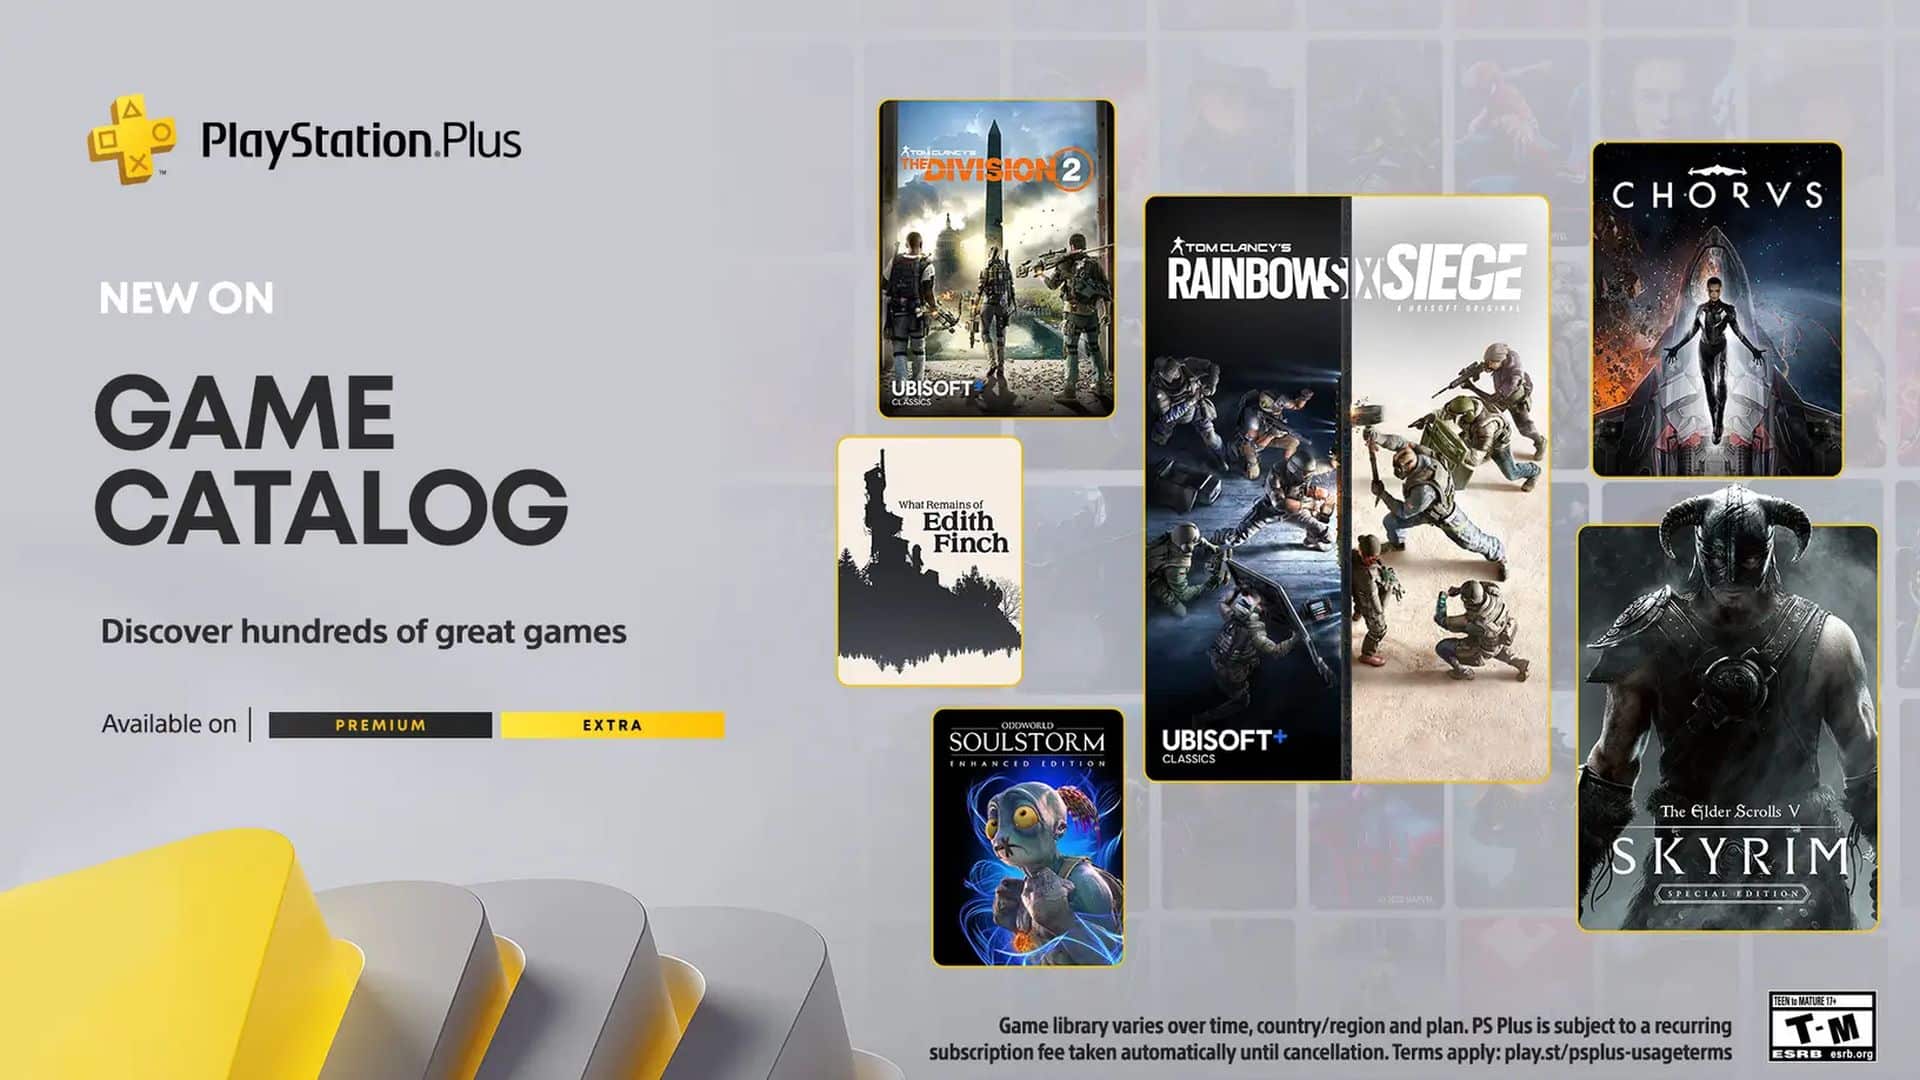 Skyrim Special Edition, The Division 2, and Chorus Coming to PlayStation Plus Extra and Premium on November 15